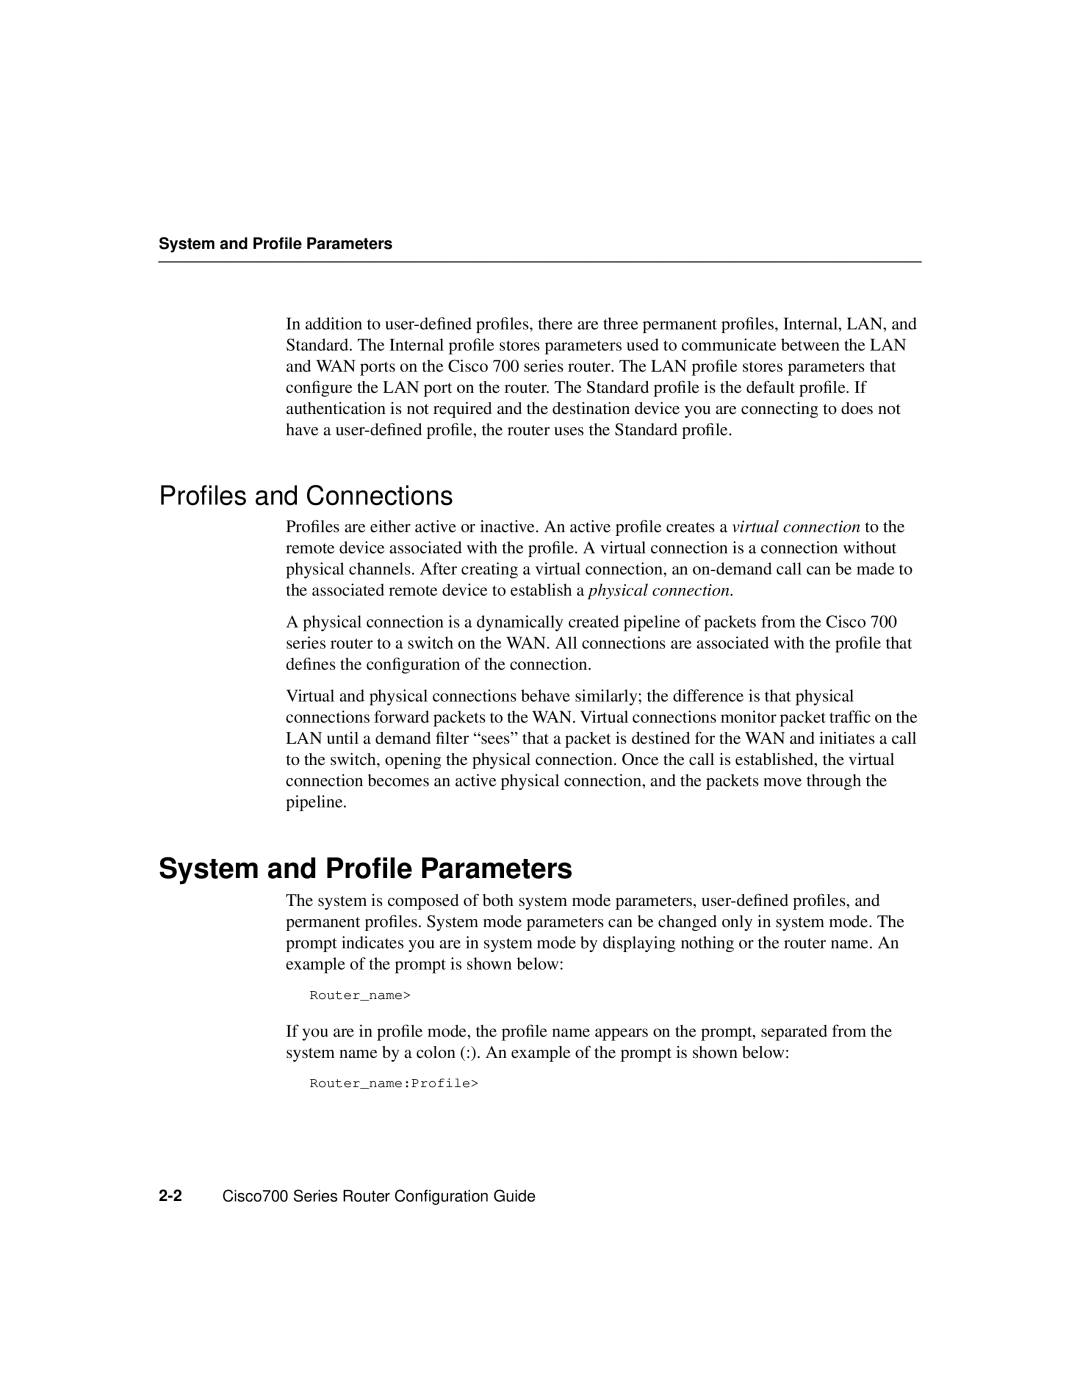 Cisco Systems 700 manual System and Proﬁle Parameters, Proﬁles and Connections 